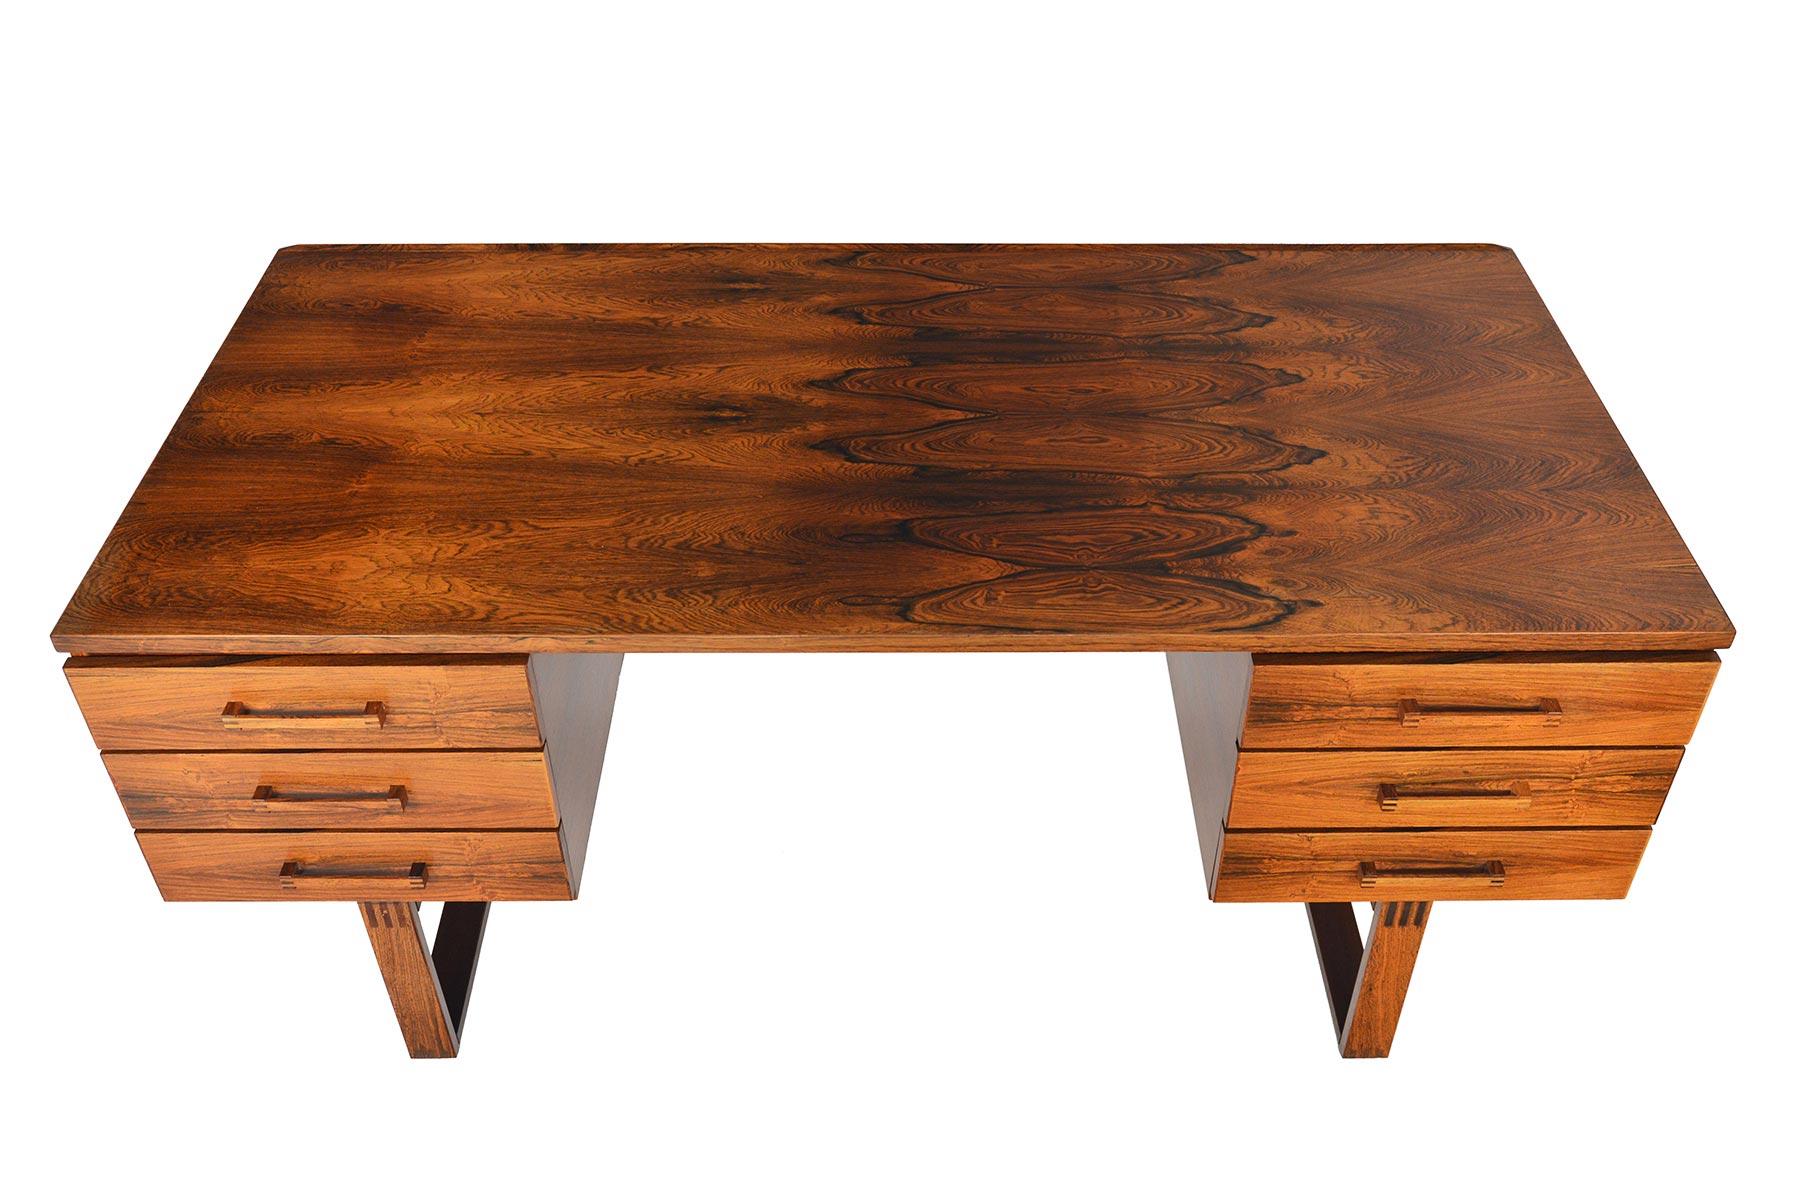 This Danish modern executive desk in Brazilian rosewood was designed by Henning Jensen and Torben Valeur for Dyrlund in the 1960s. The spacious kneehole is nestled between two banks of drawers. Each drawer features a solid rosewood, finger- joined